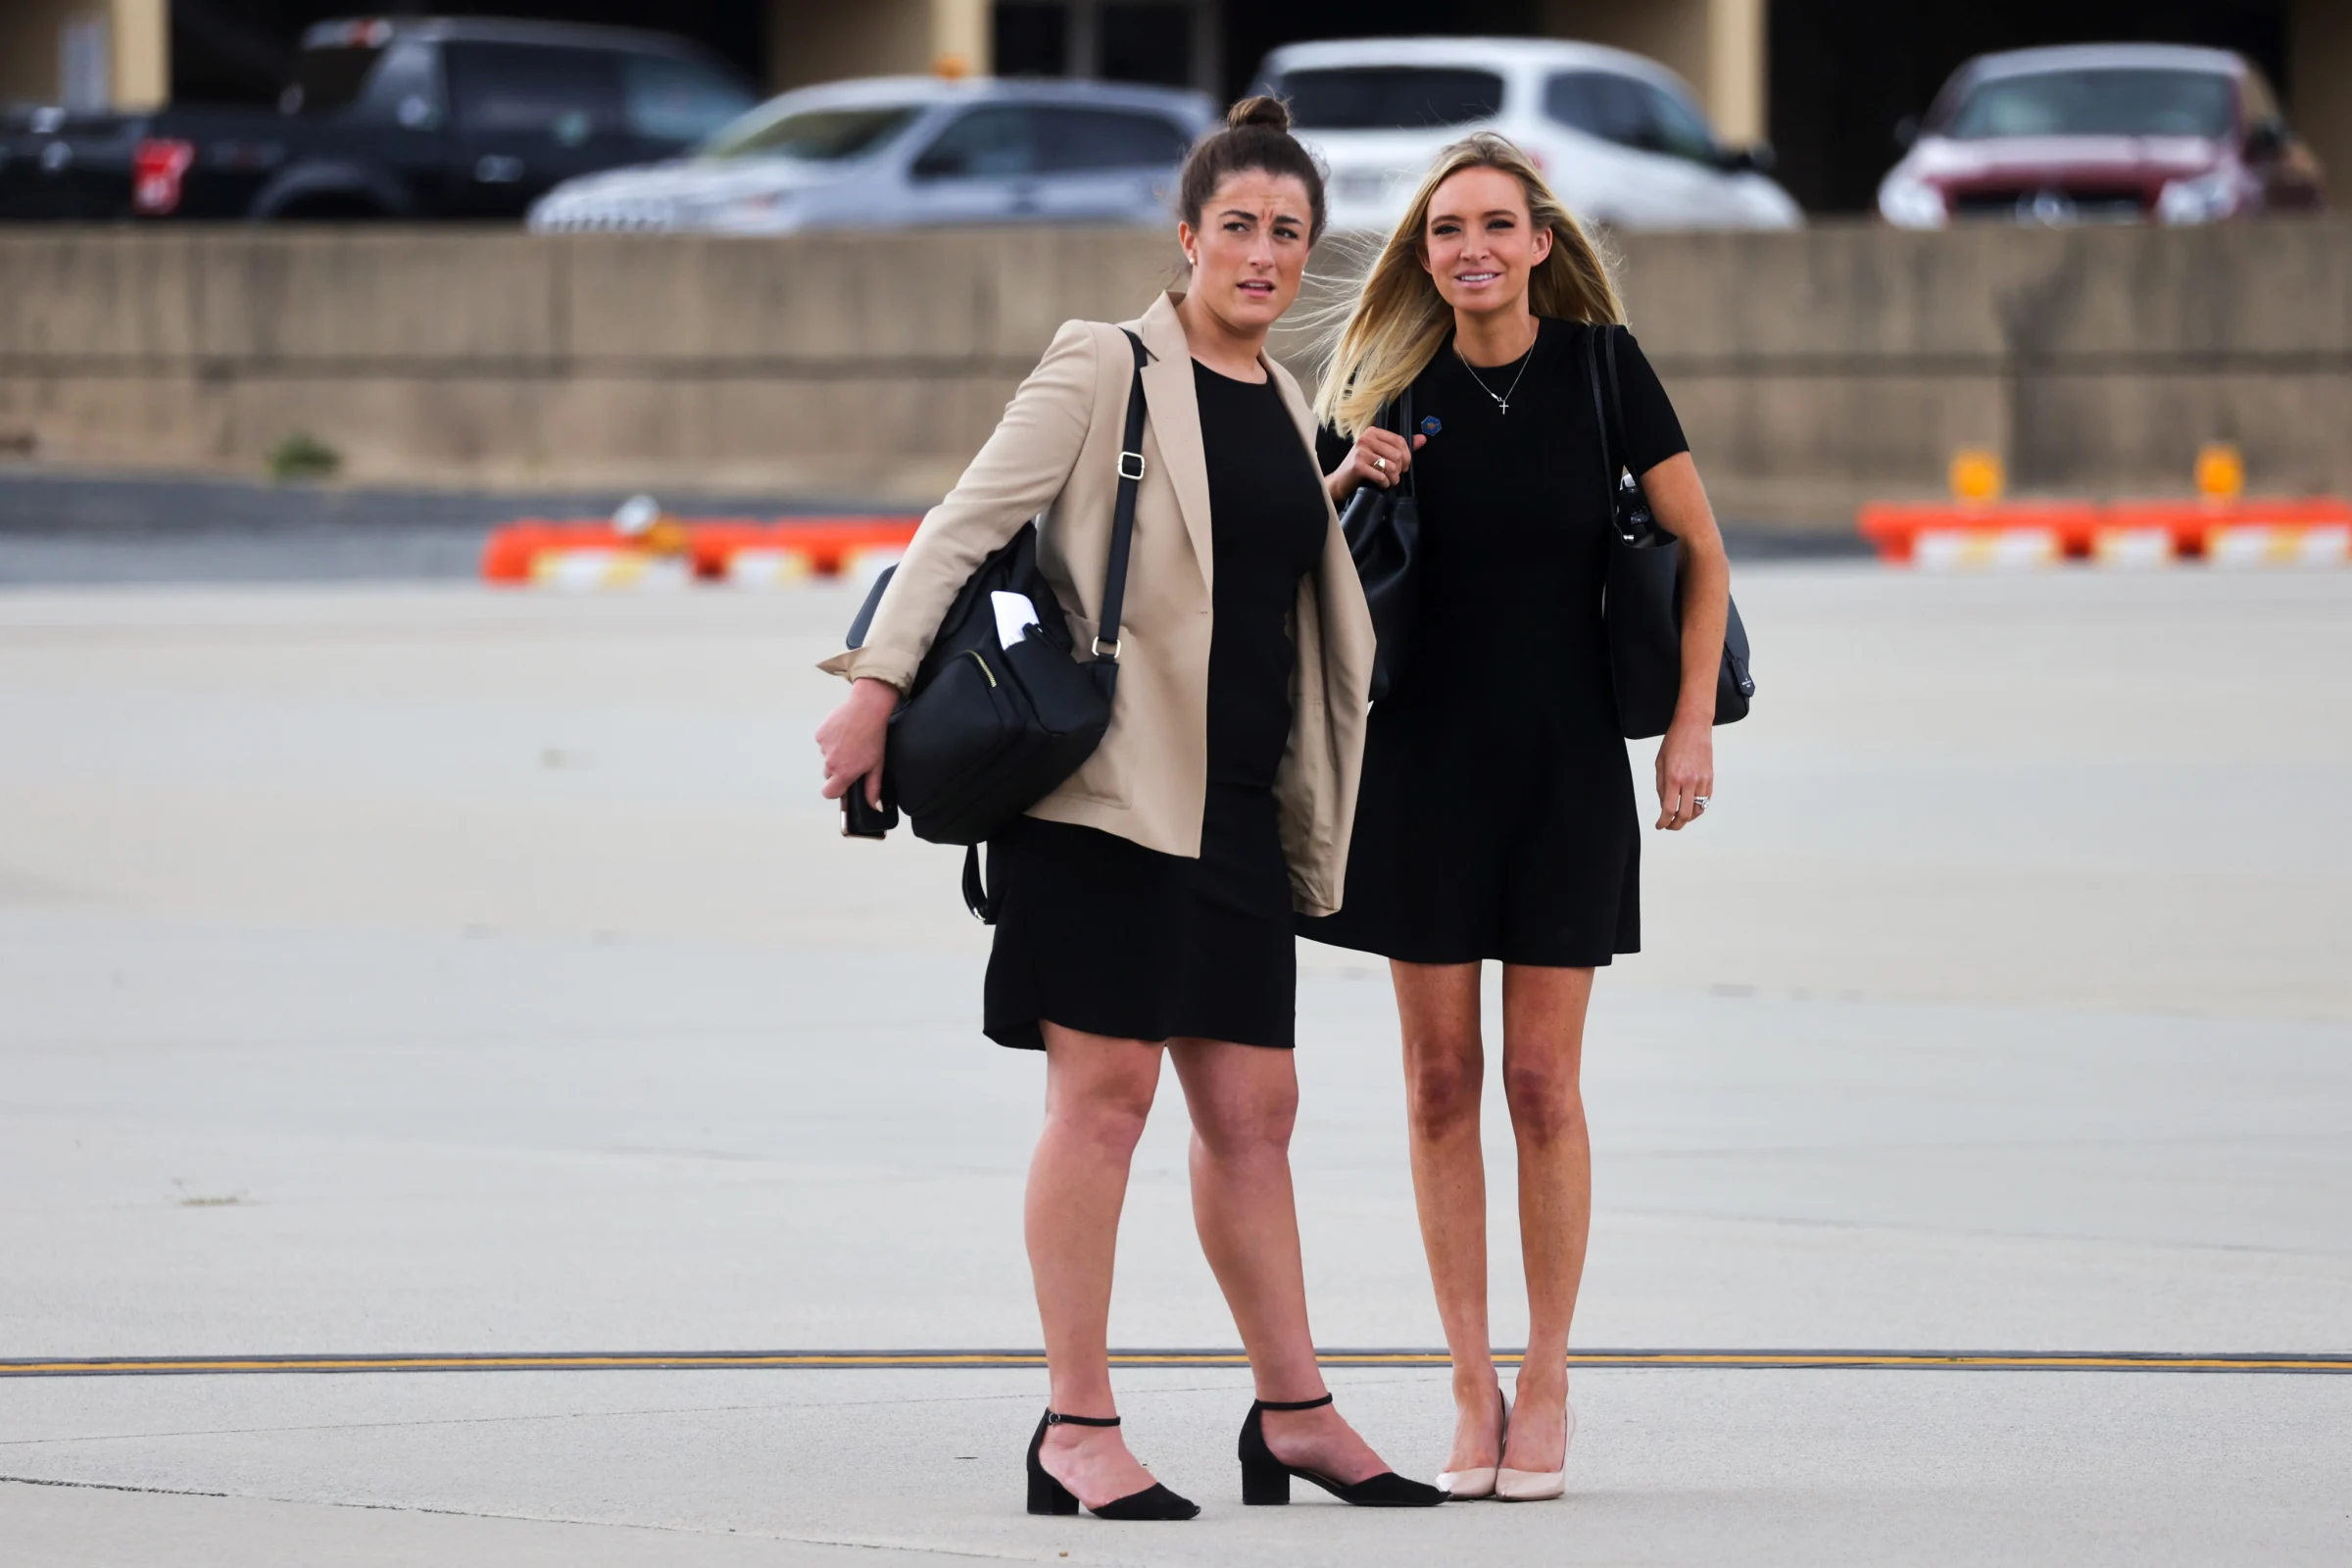 Cassidy Hutchinson in January 2020 wearing a skirt and blazer combo described in her story about being assaulted by Rudy Giuliani the day of the Capitol Riot.